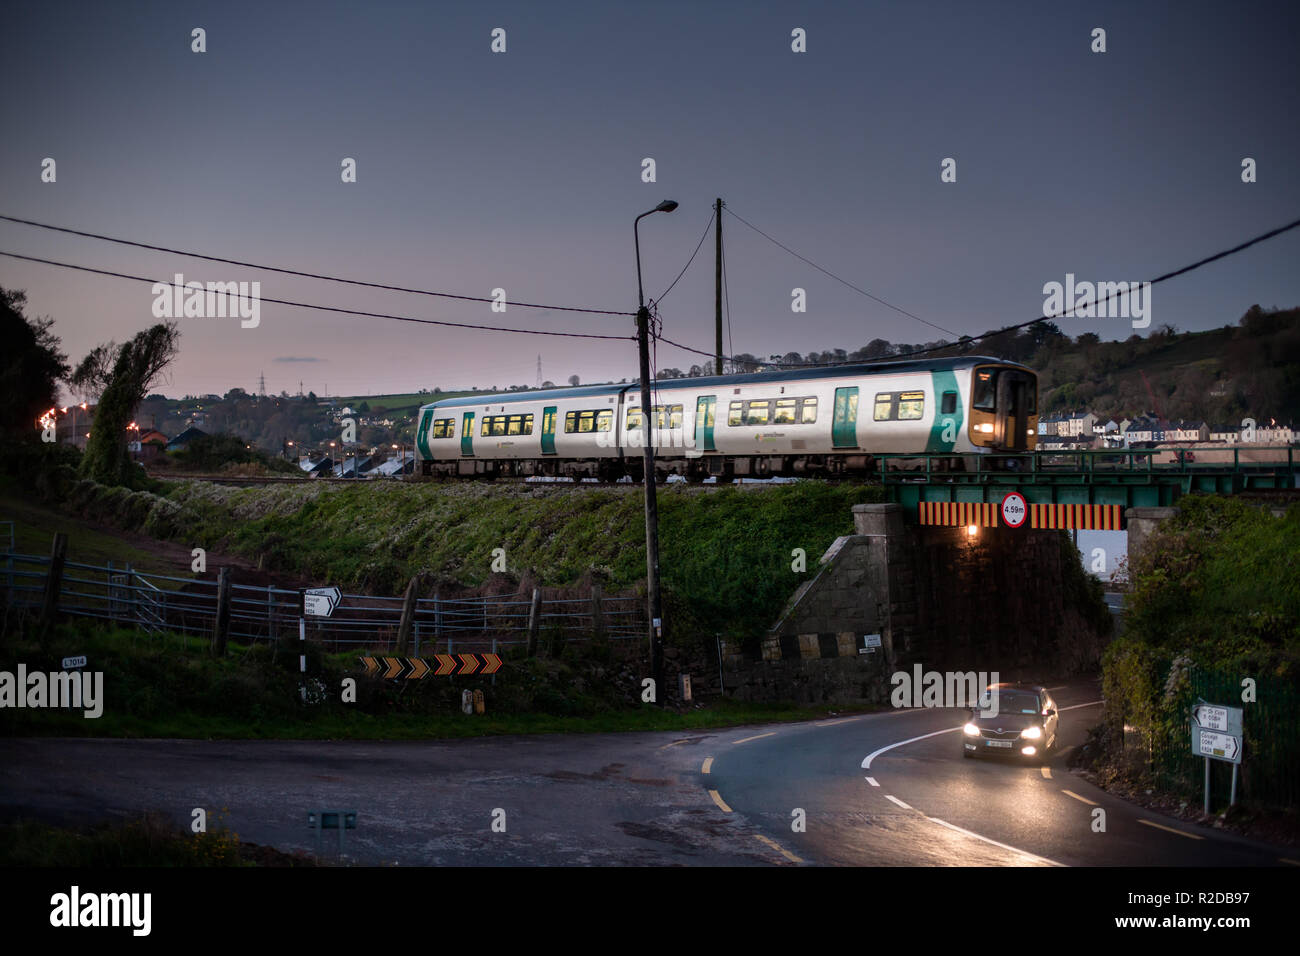 Rushbrooke, Cork, Ireland. 19th November, 2018. An early morning commuter train from Cobh passes over a road at Rushbrooke, Co. Cork, Ireland. Credit: David Creedon/Alamy Live News Stock Photo